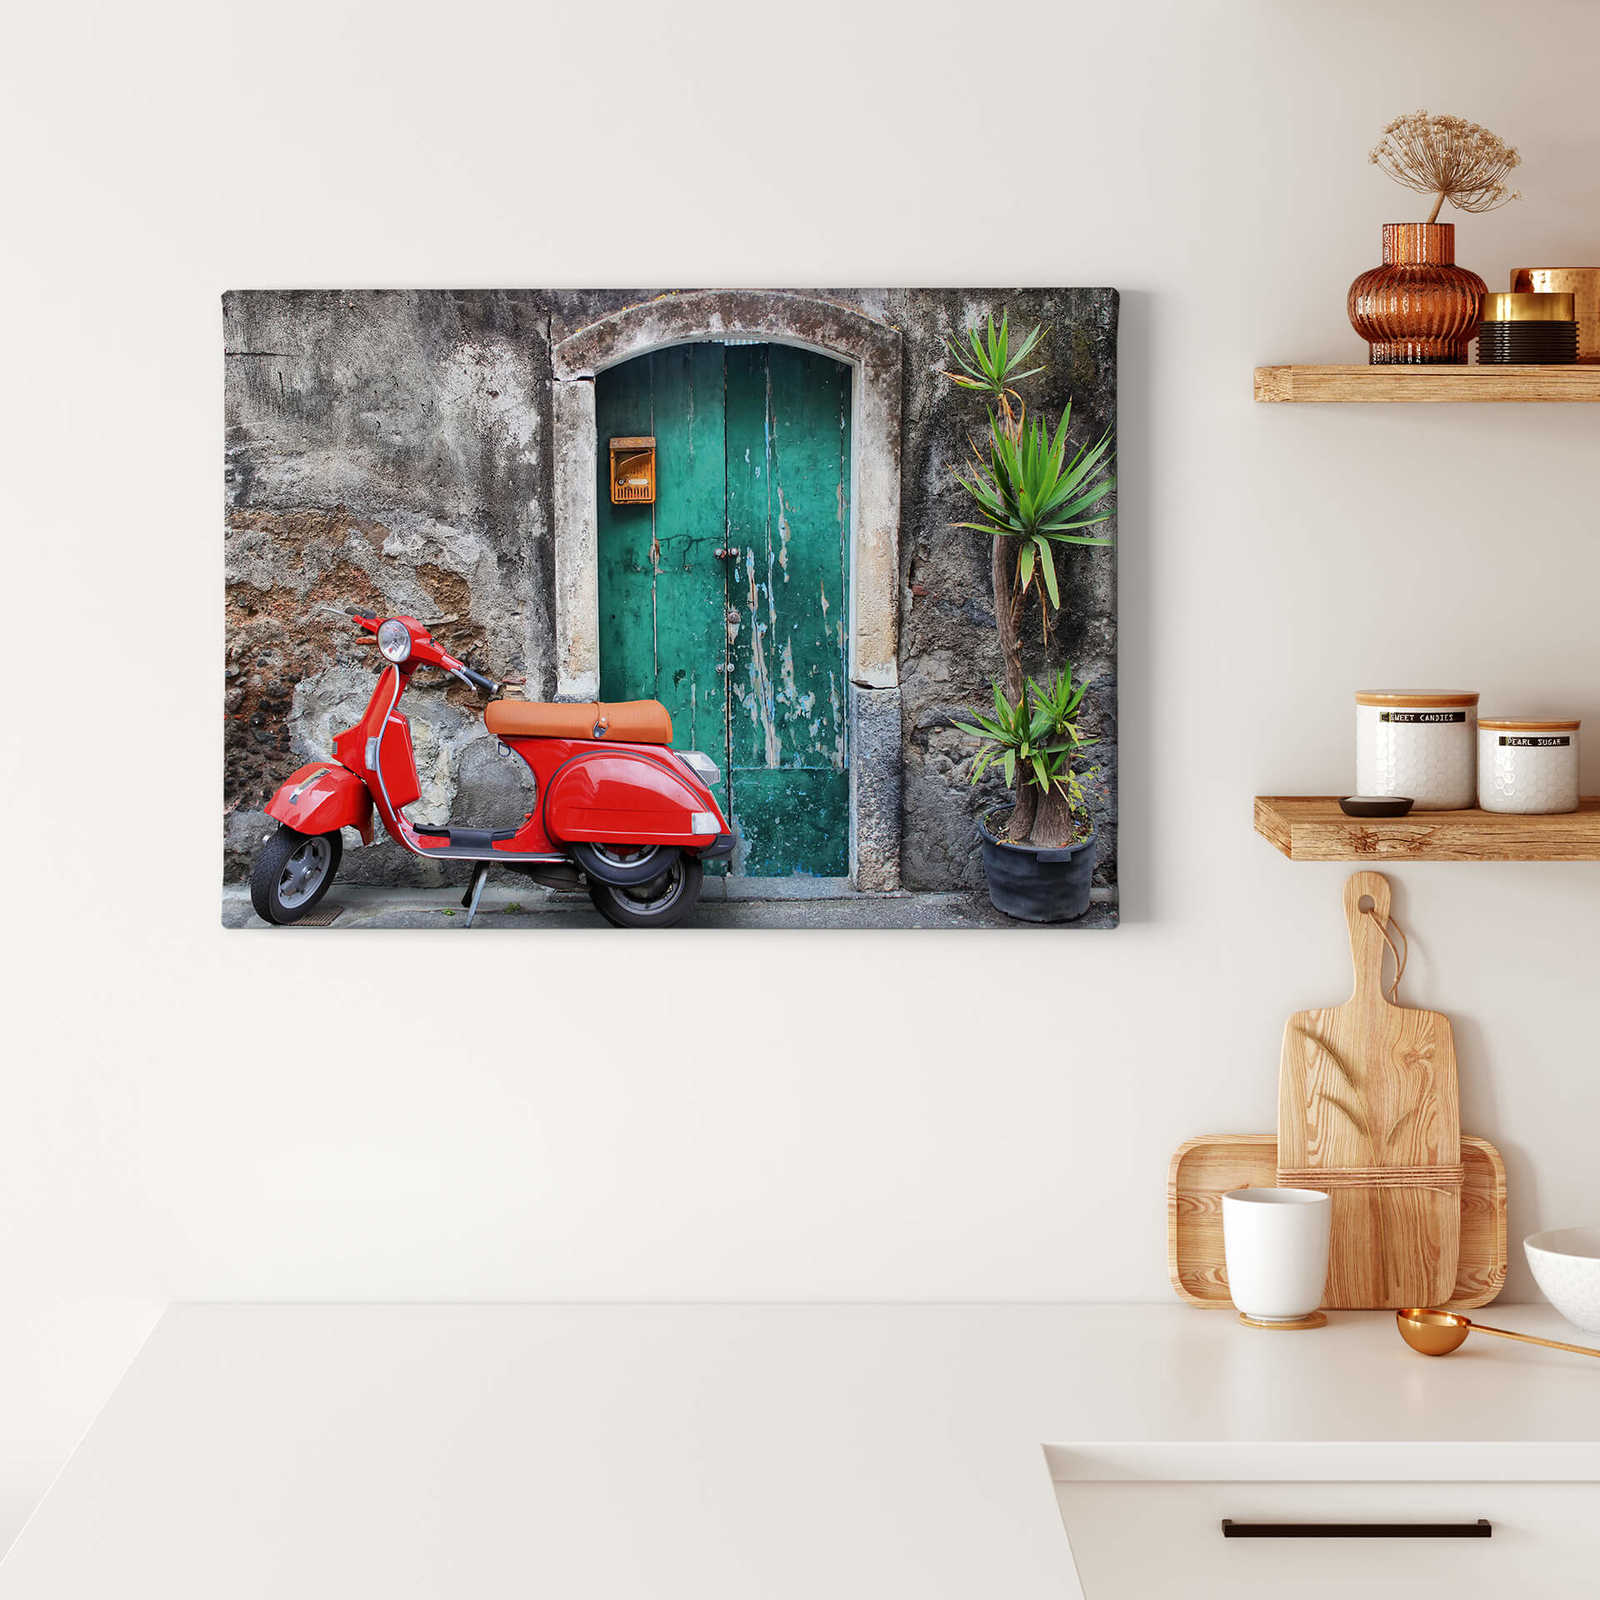             Canvas print red scooter, 70 x 50 cm – multicoloured
        